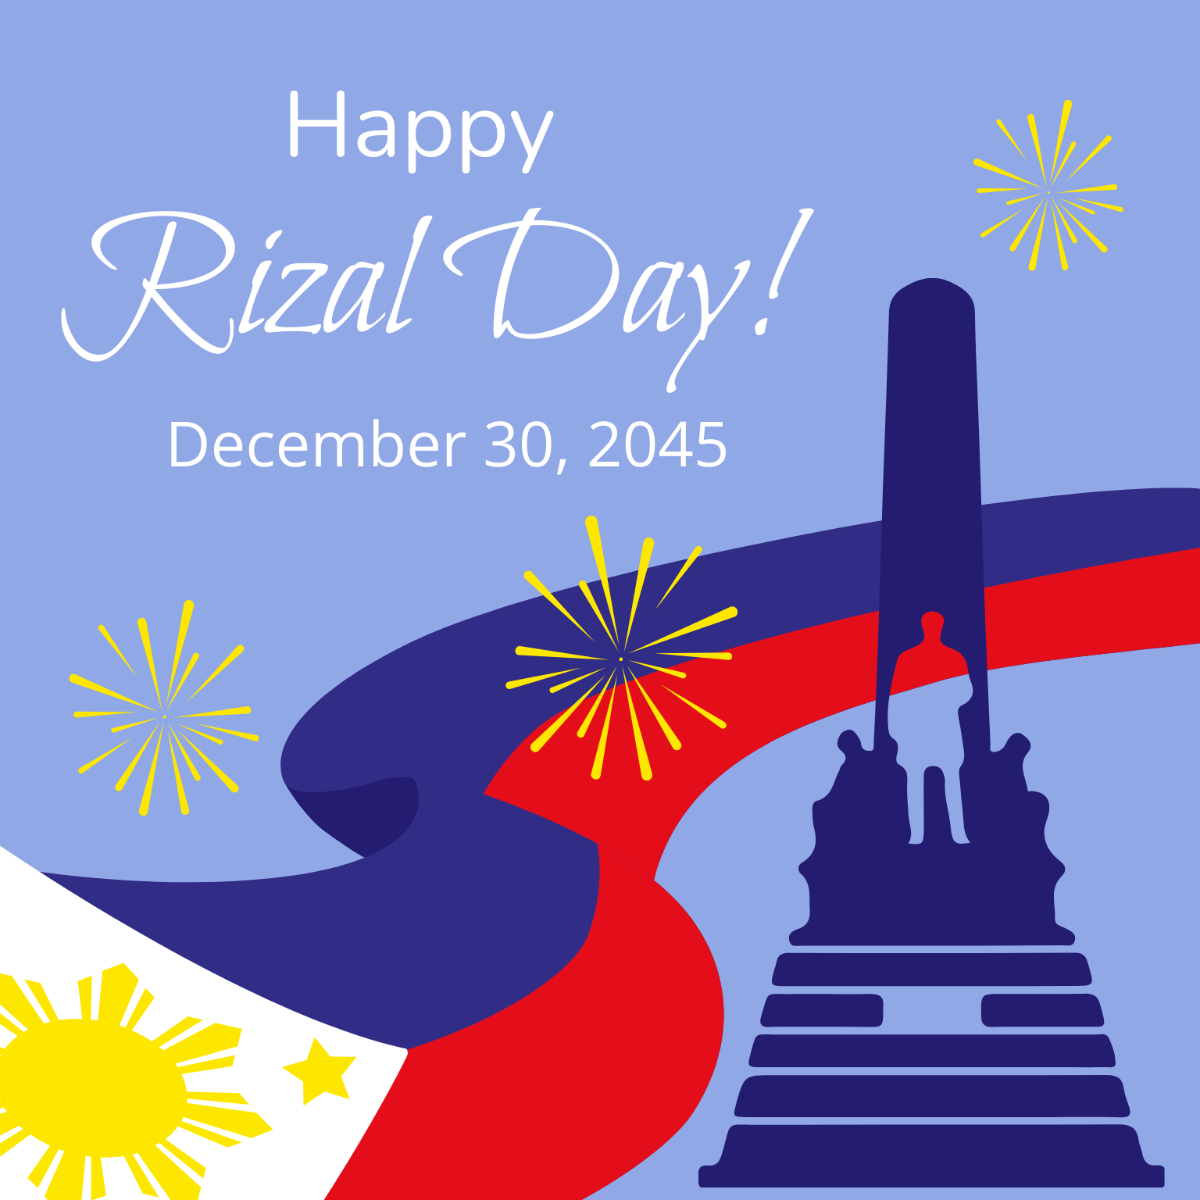 Rizal Day Wishes Vector Template